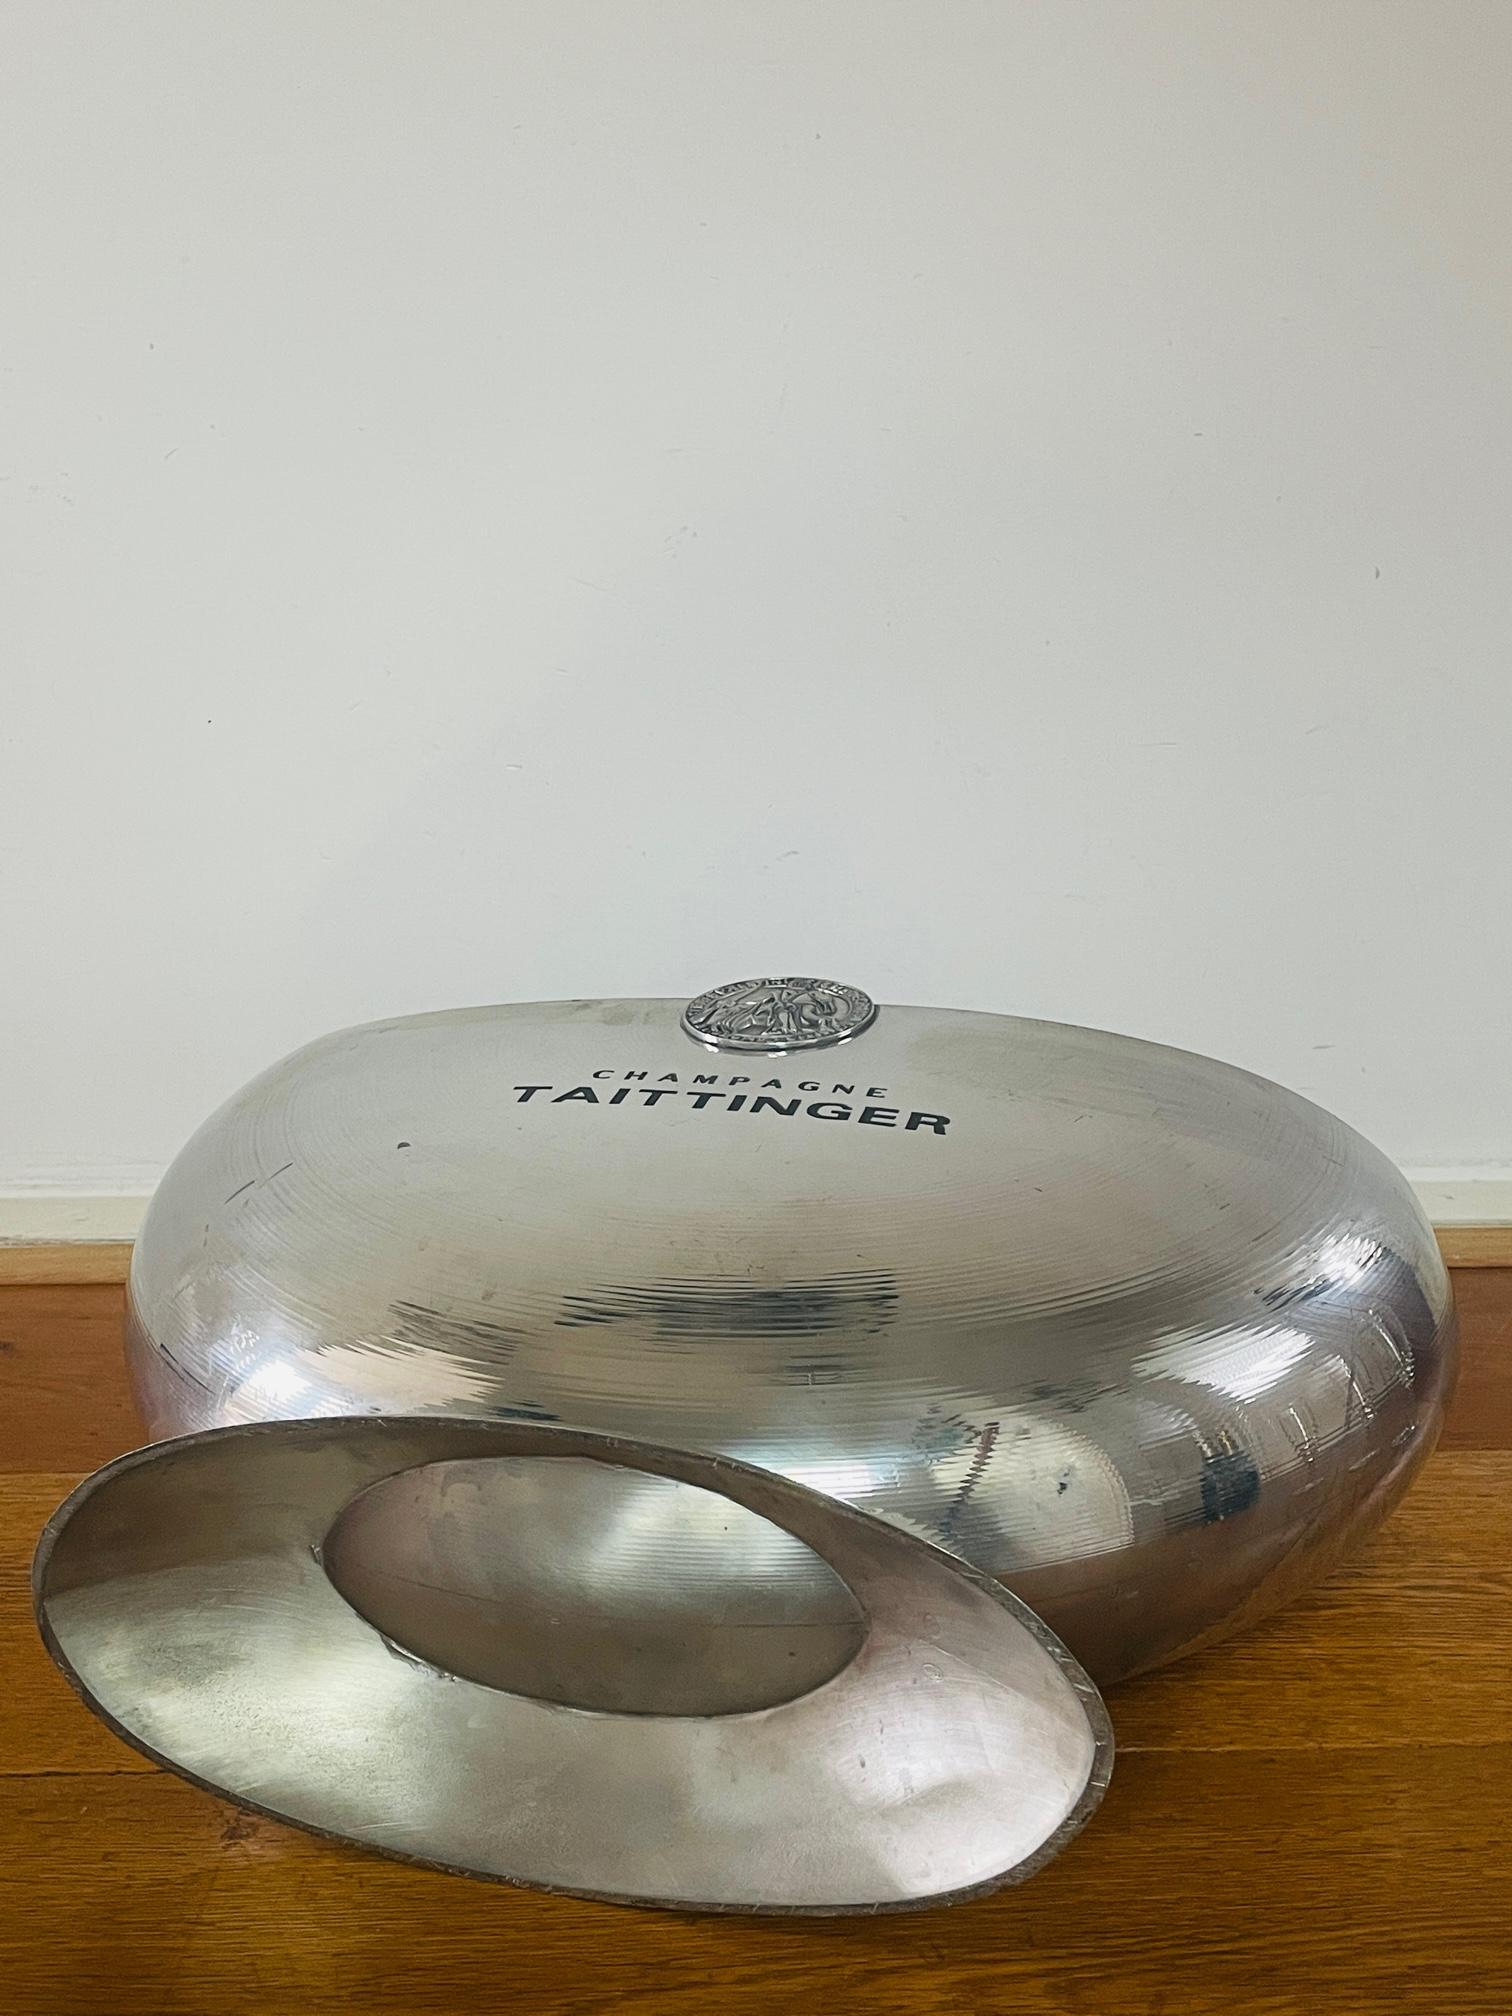 Taittinger half-moon Champagne bowl. Beautiful pewter champagne cooler by Etain 6